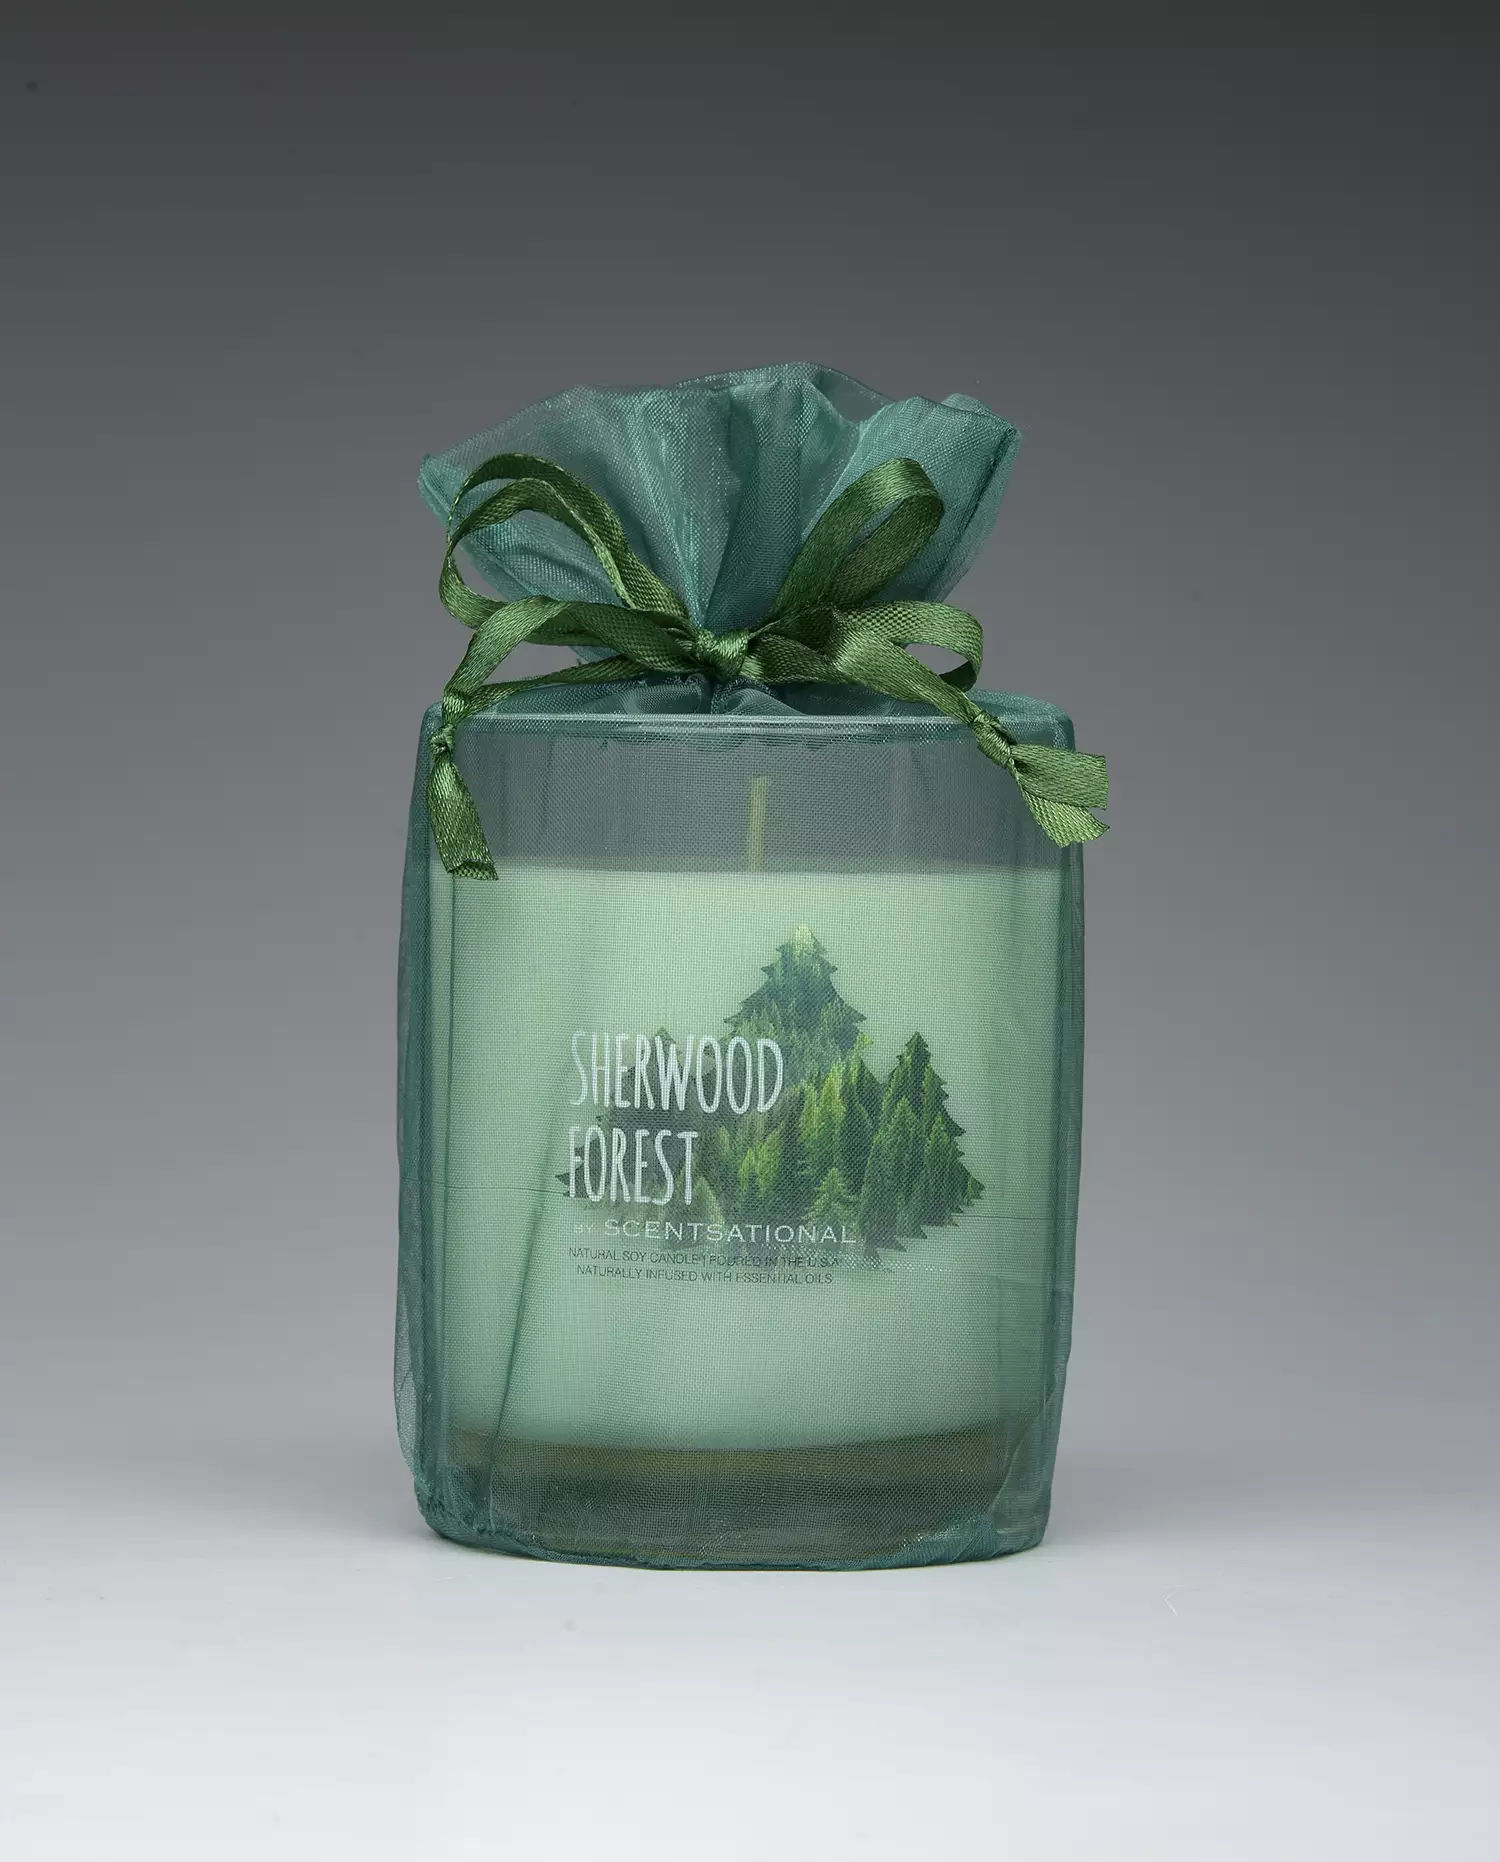 Sherwood Forest - 11oz Scented Candle